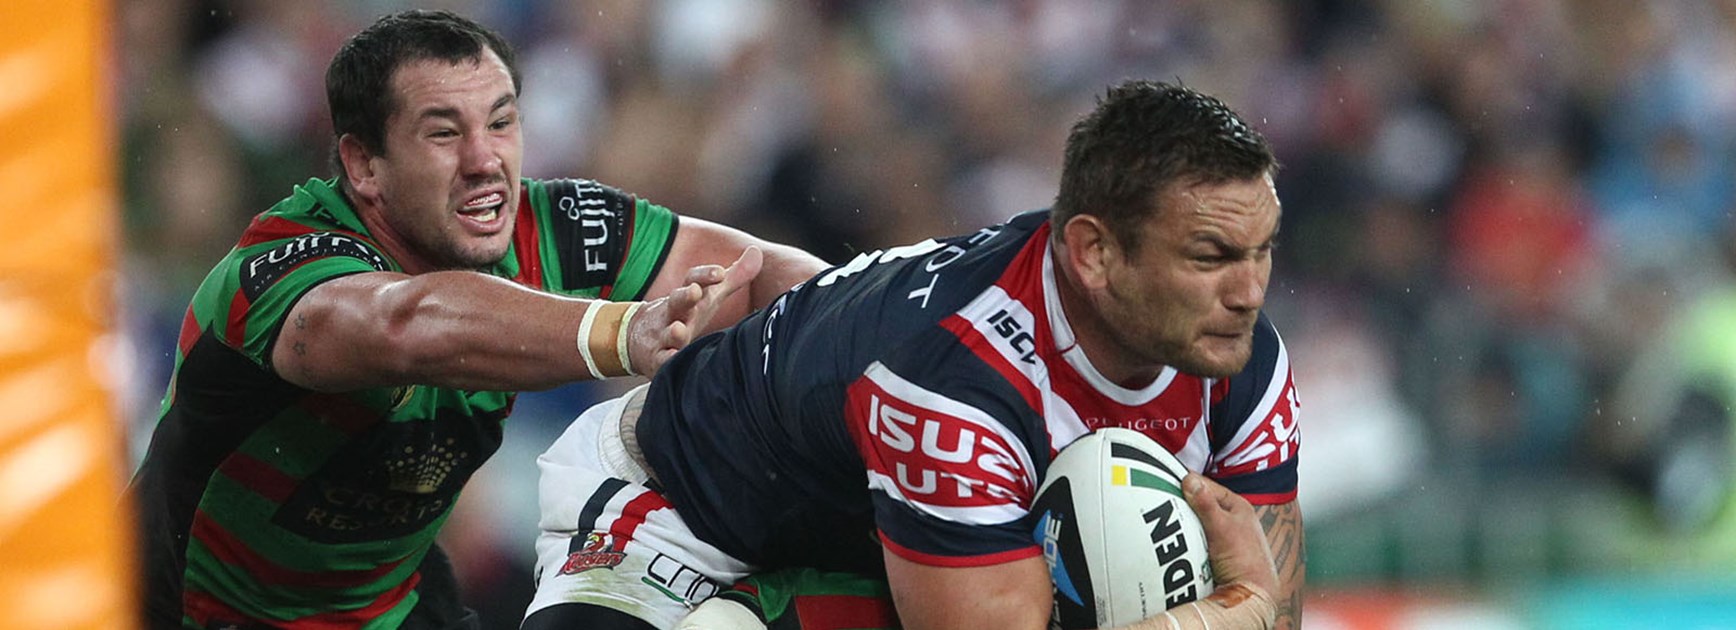 Jared Waerea-Hargreaves is stopped during the Roosters 2014 Preliminary Final loss to the Rabbitohs.